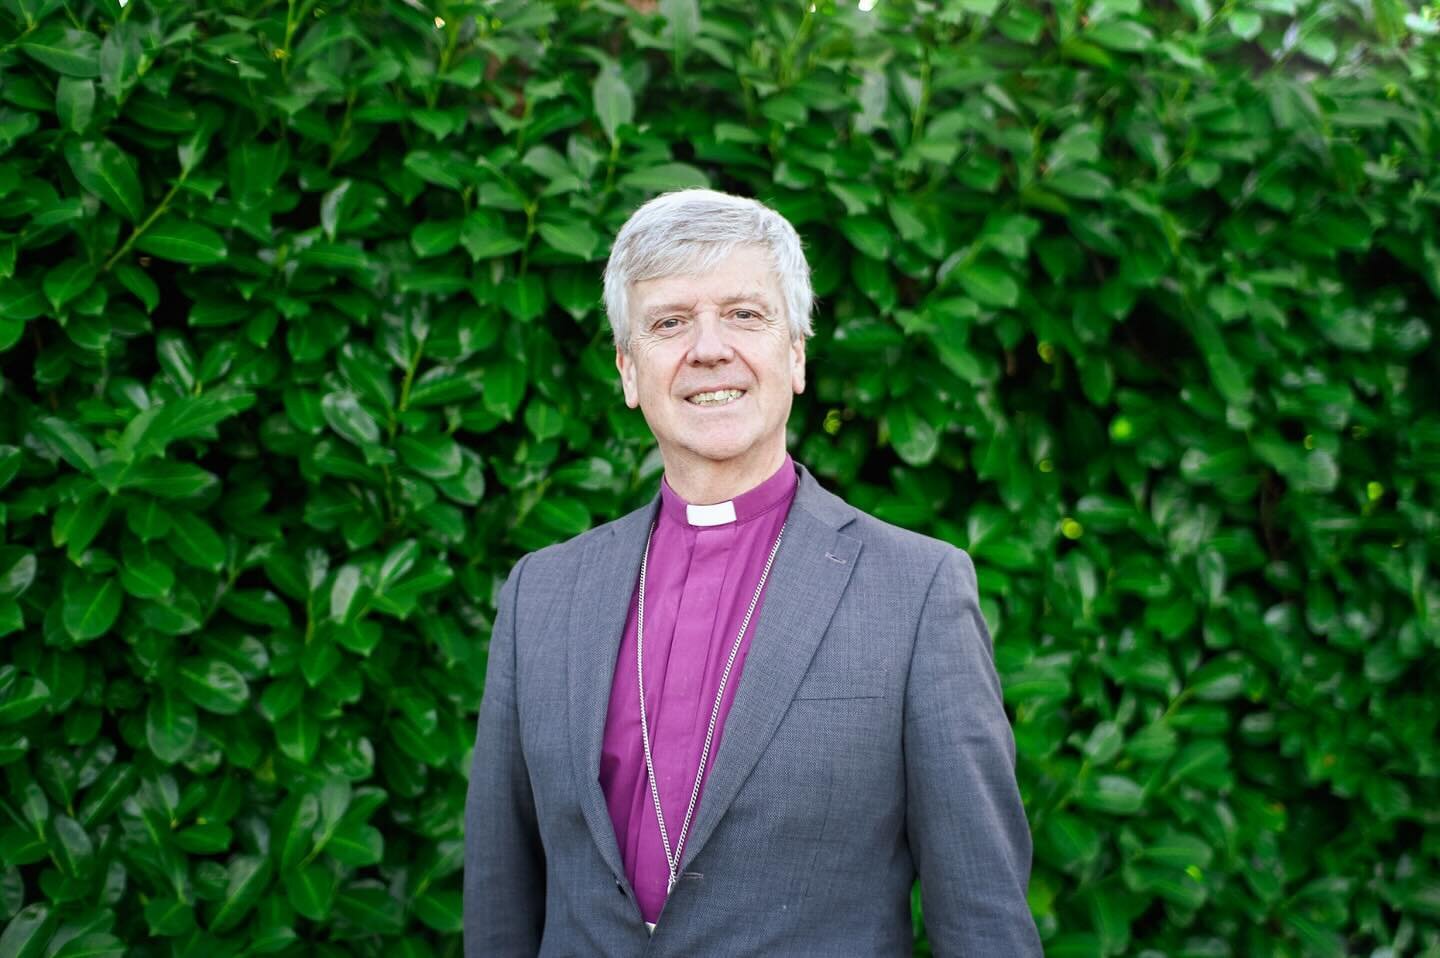 Bishop Andrew will be joining us at our 4pm service in the St Peter&rsquo;s Community and Youth Hub. Today&rsquo;s service will include confirmations and a Mother&rsquo;s Day celebration. Everyone&rsquo;s welcome to come along!

#guildforddiocese #bi